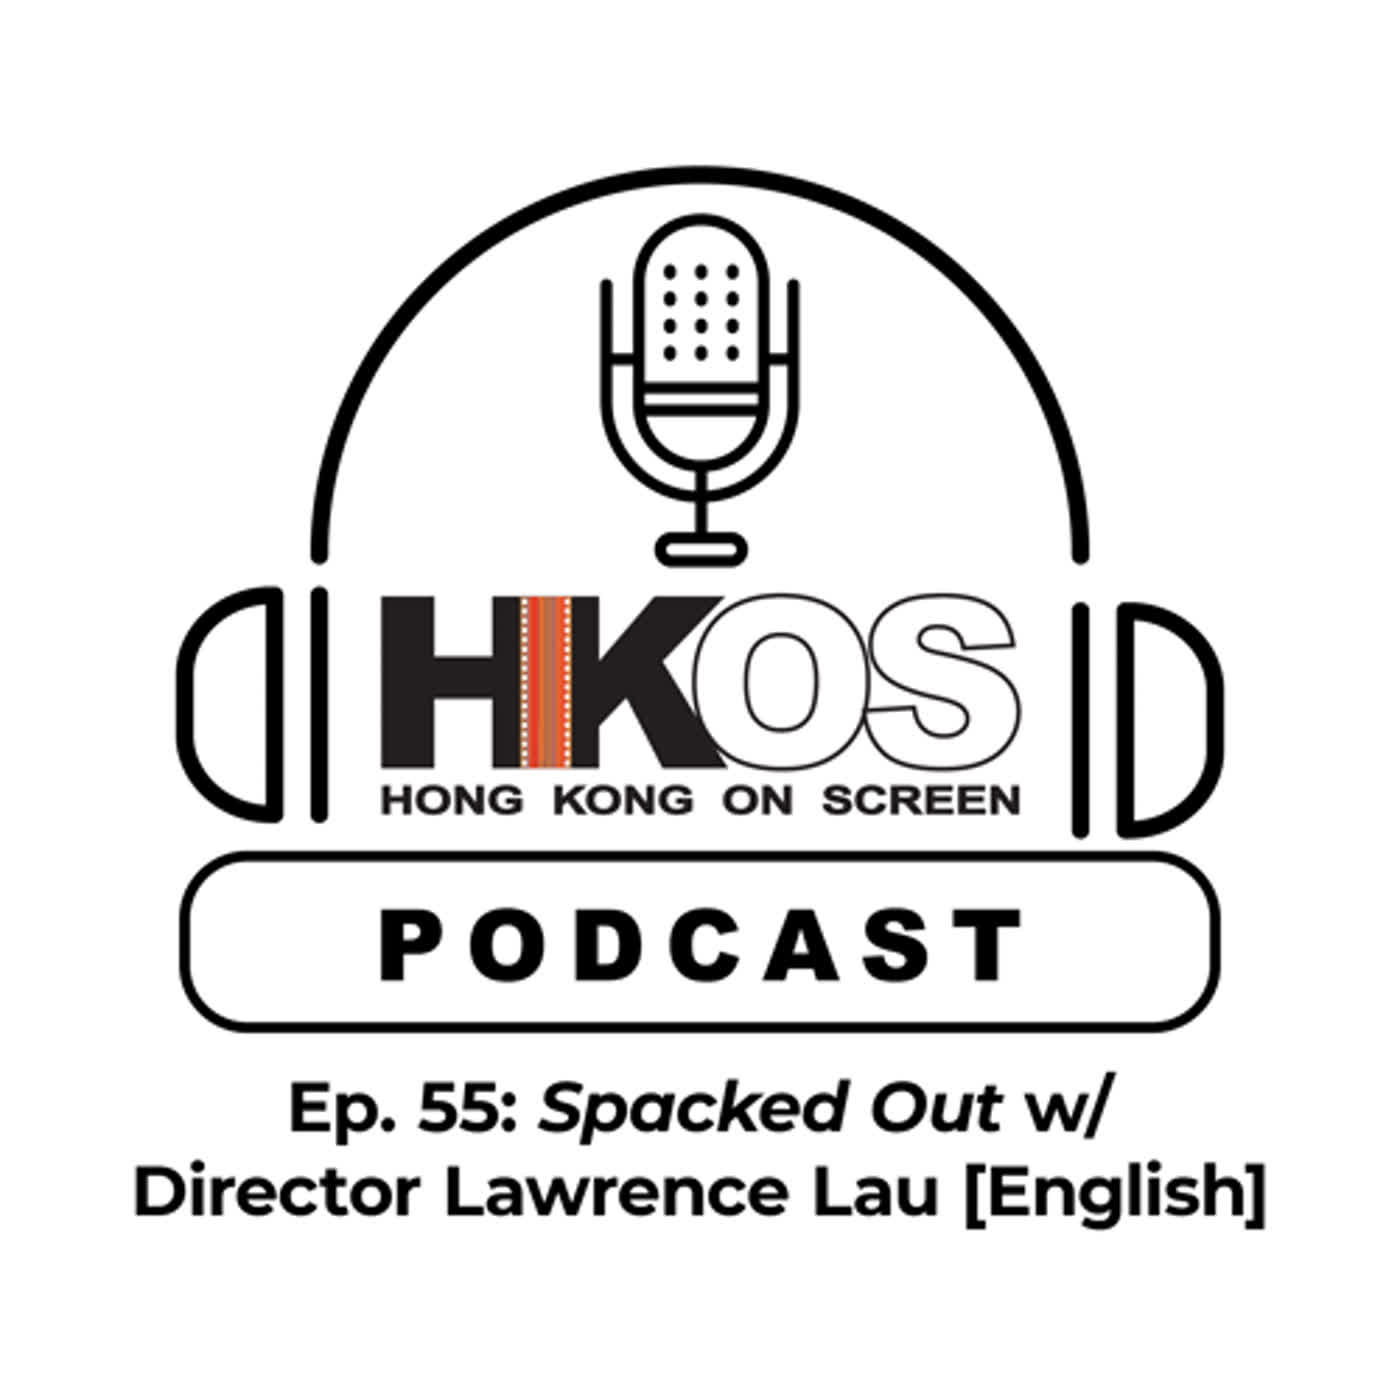 Ep. 55: Spacked Out w/ Director Lawrence Lau [English]